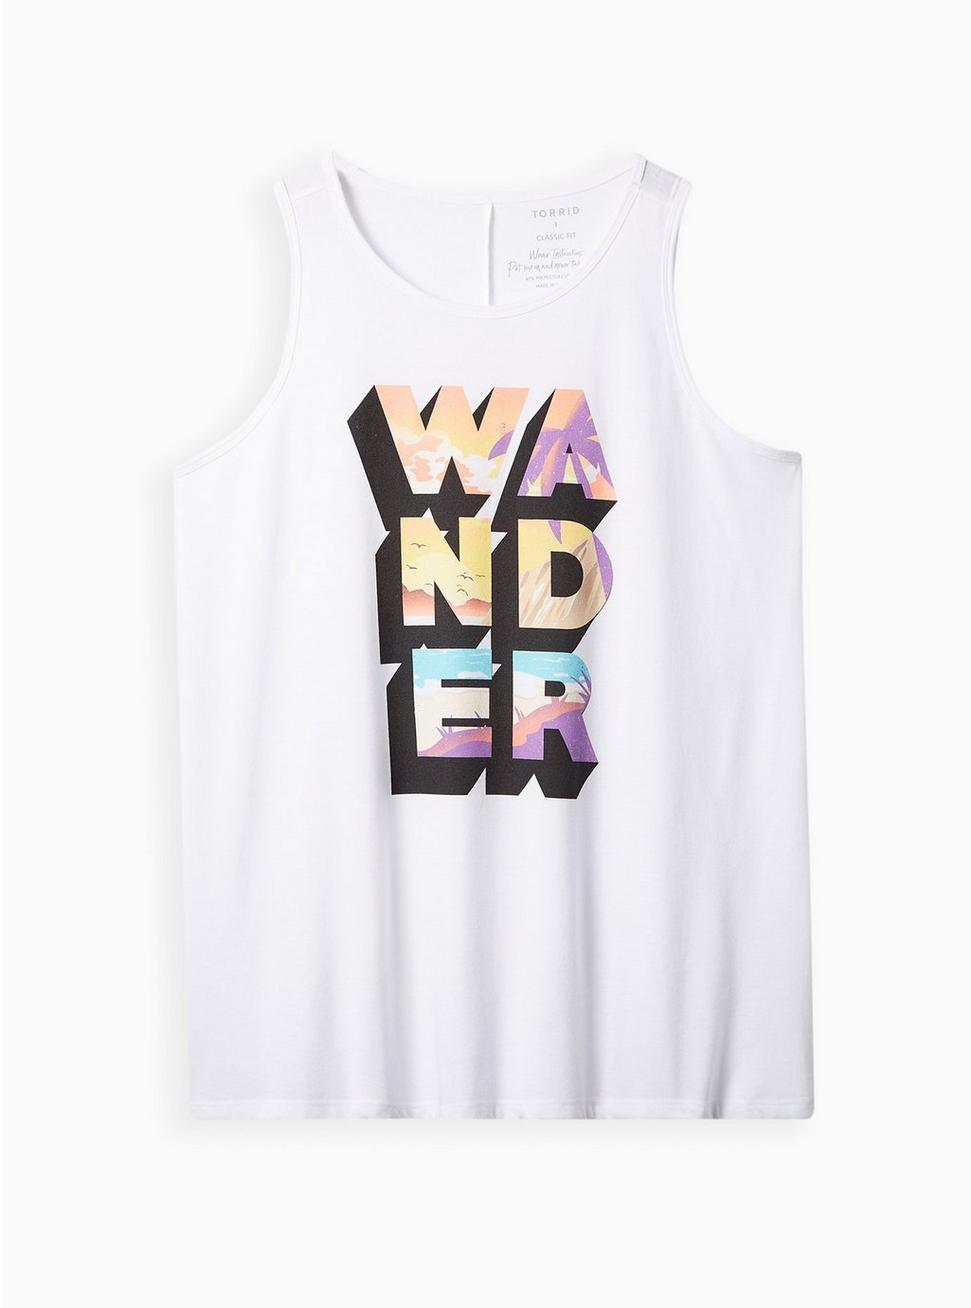 Plus Size Everyday Tank - Signature Jersey Wander White, BRIGHT WHITE, hi-res